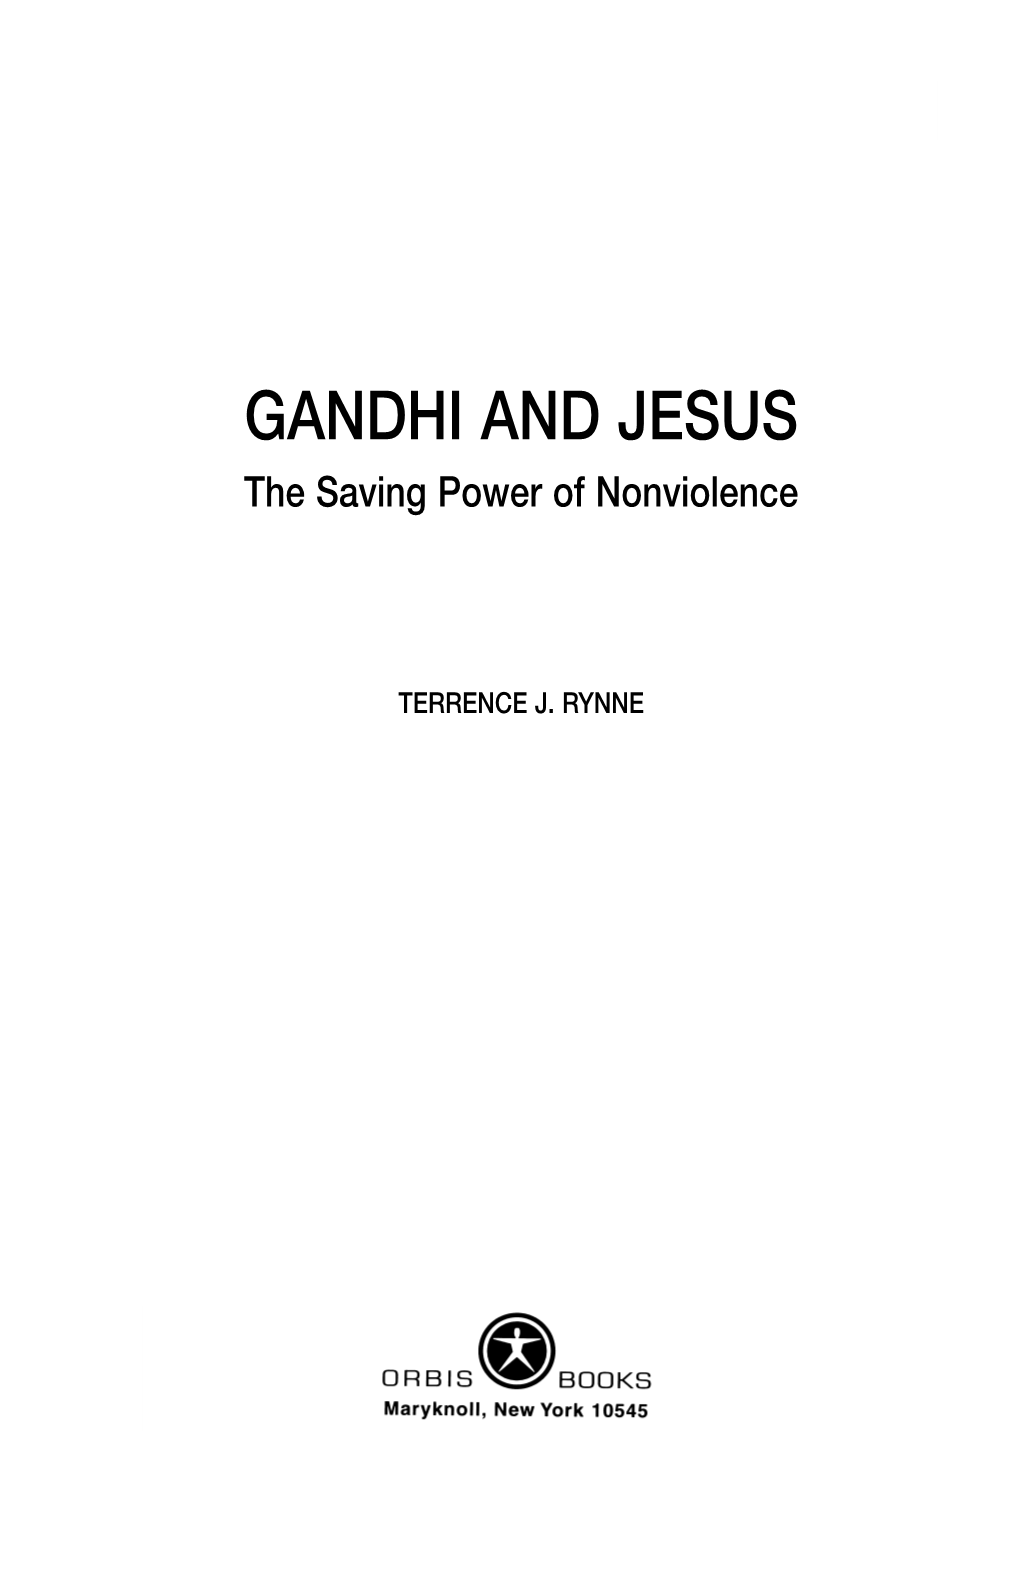 GANDHI and JESUS the Saving Power of Nonviolence